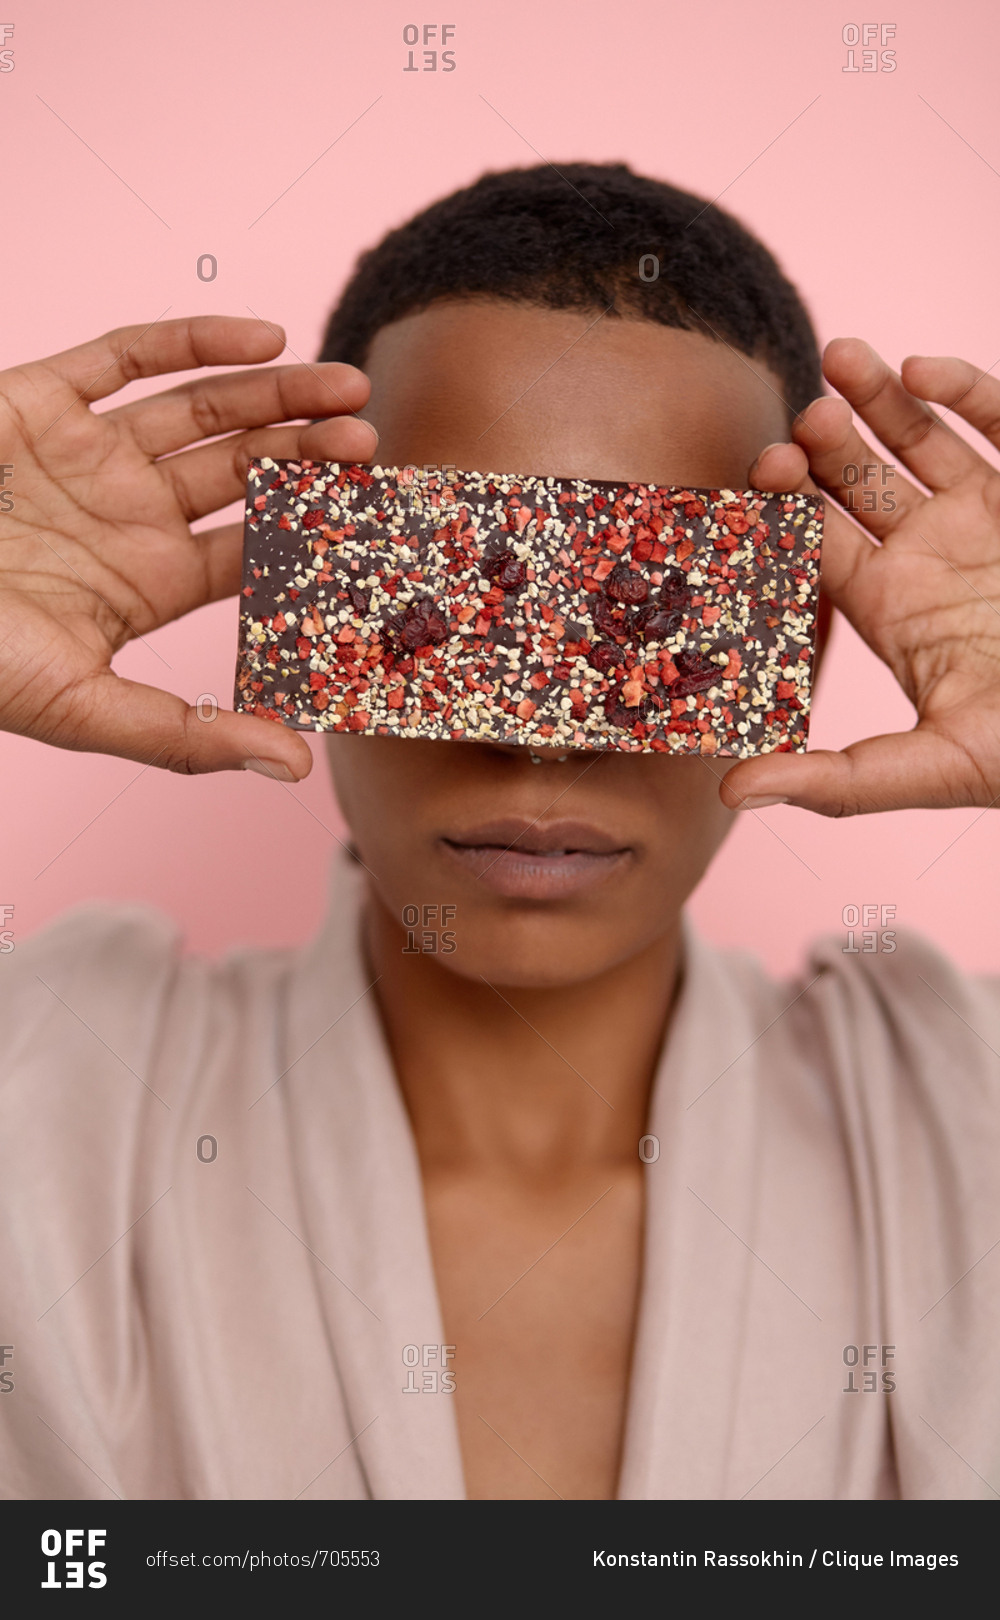 Conceptual portrait of young Black woman with short haircut hiding her eyes with smartphone in glittery case on pink background